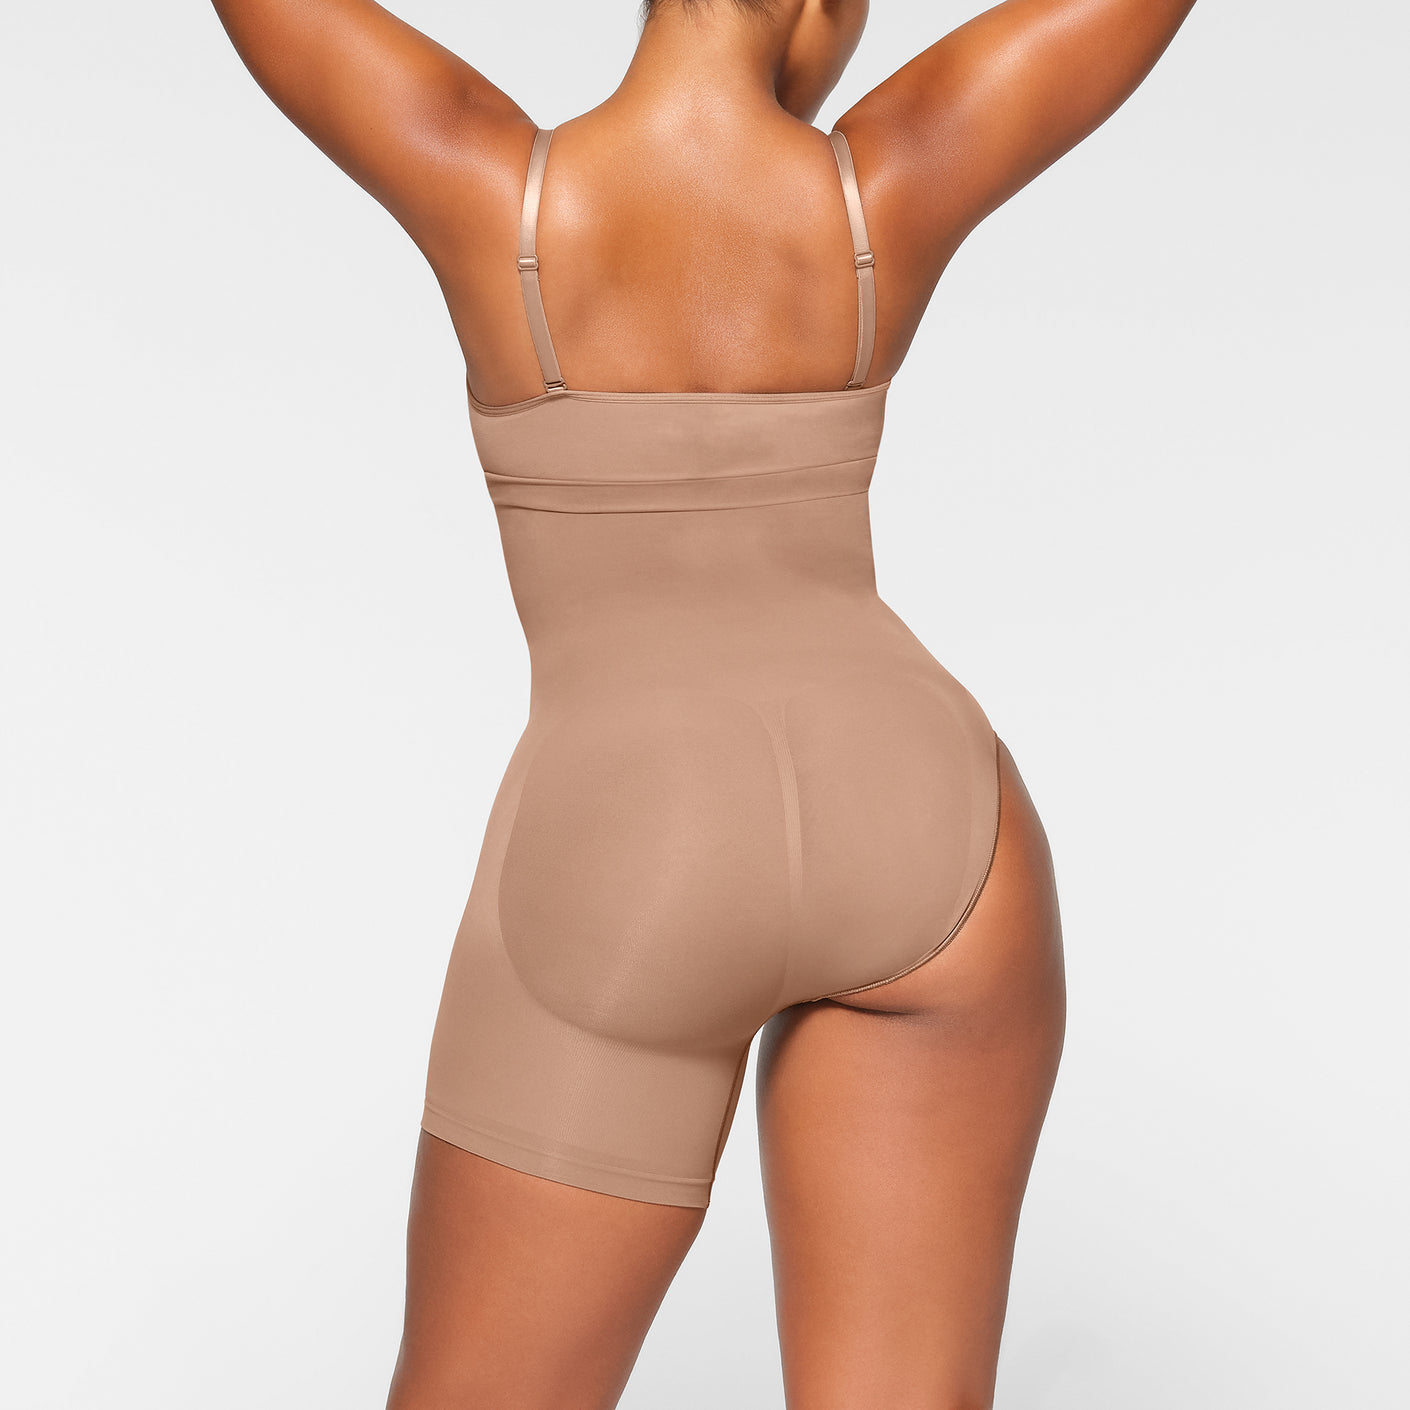 Cinched. Smoothed. Supported. Check! We just replenished the innovative  Seamless Sculpt shapewear solutions you love, just in time for your…